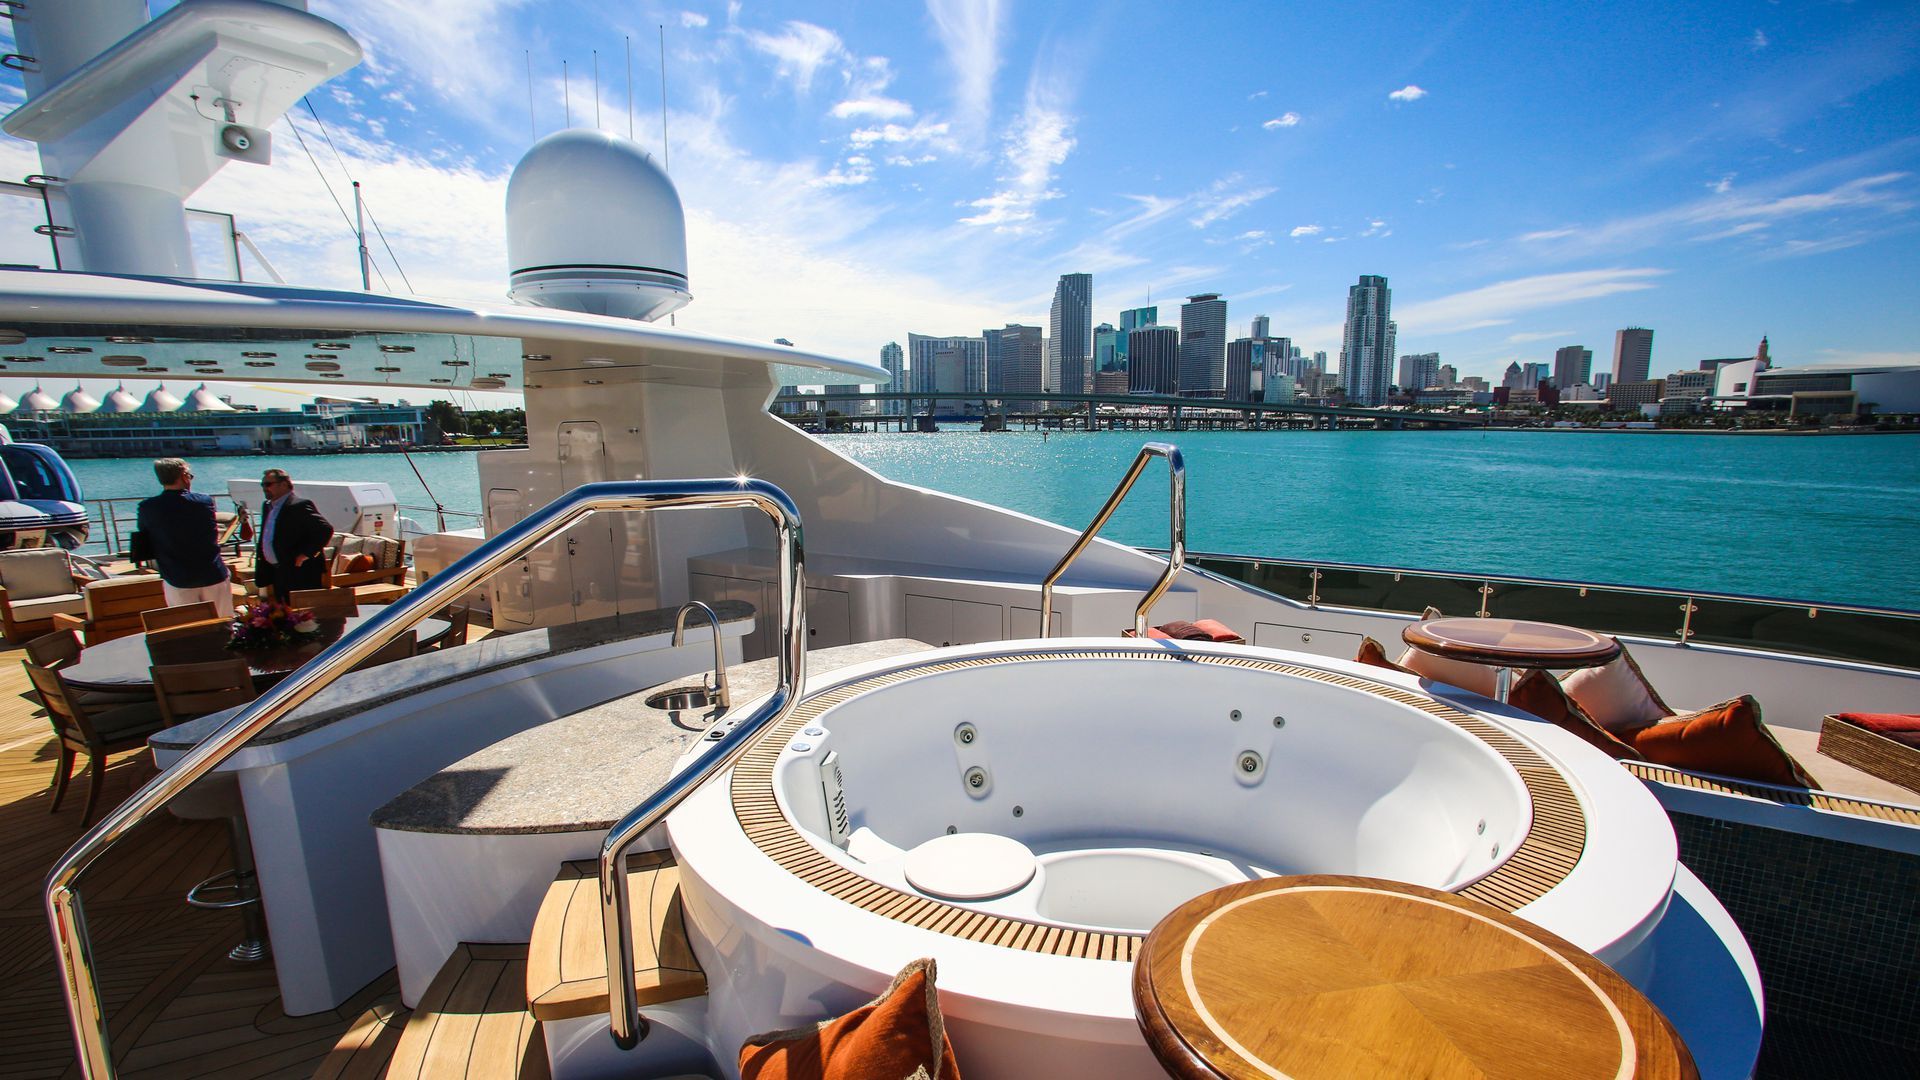 A jacuzzi sits on the deck of superyacht Natita during the Superyacht Miami boat show at Island Gardens Deep Harbour in Biscayne Bay. 